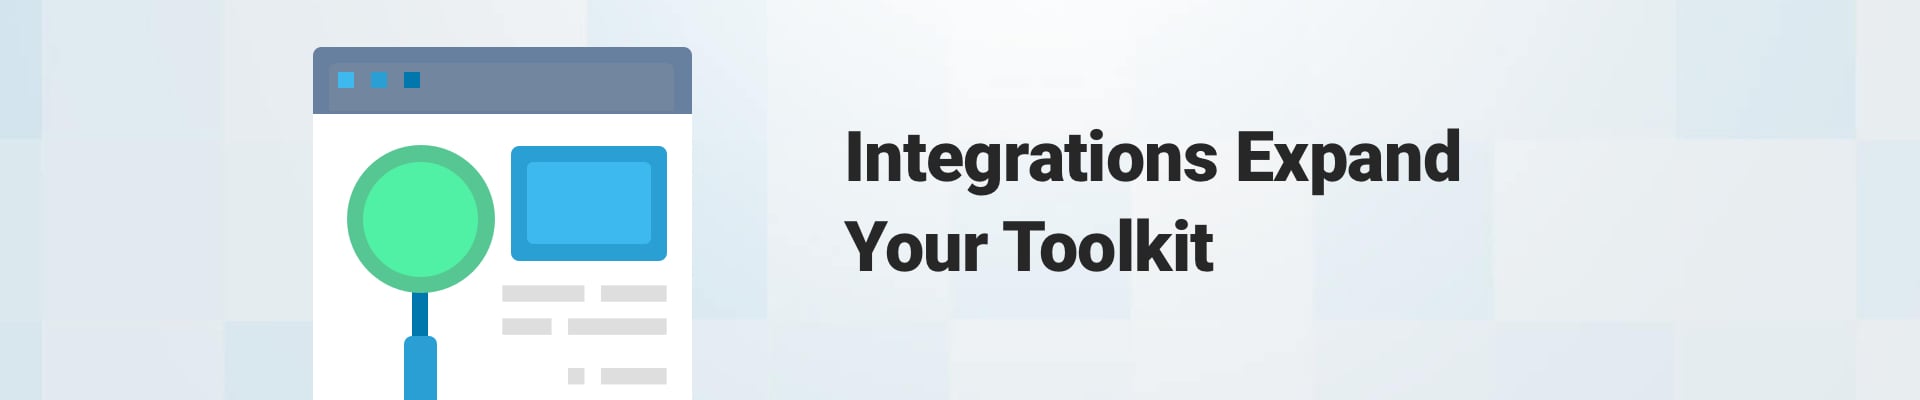 integrations expand your toolkit